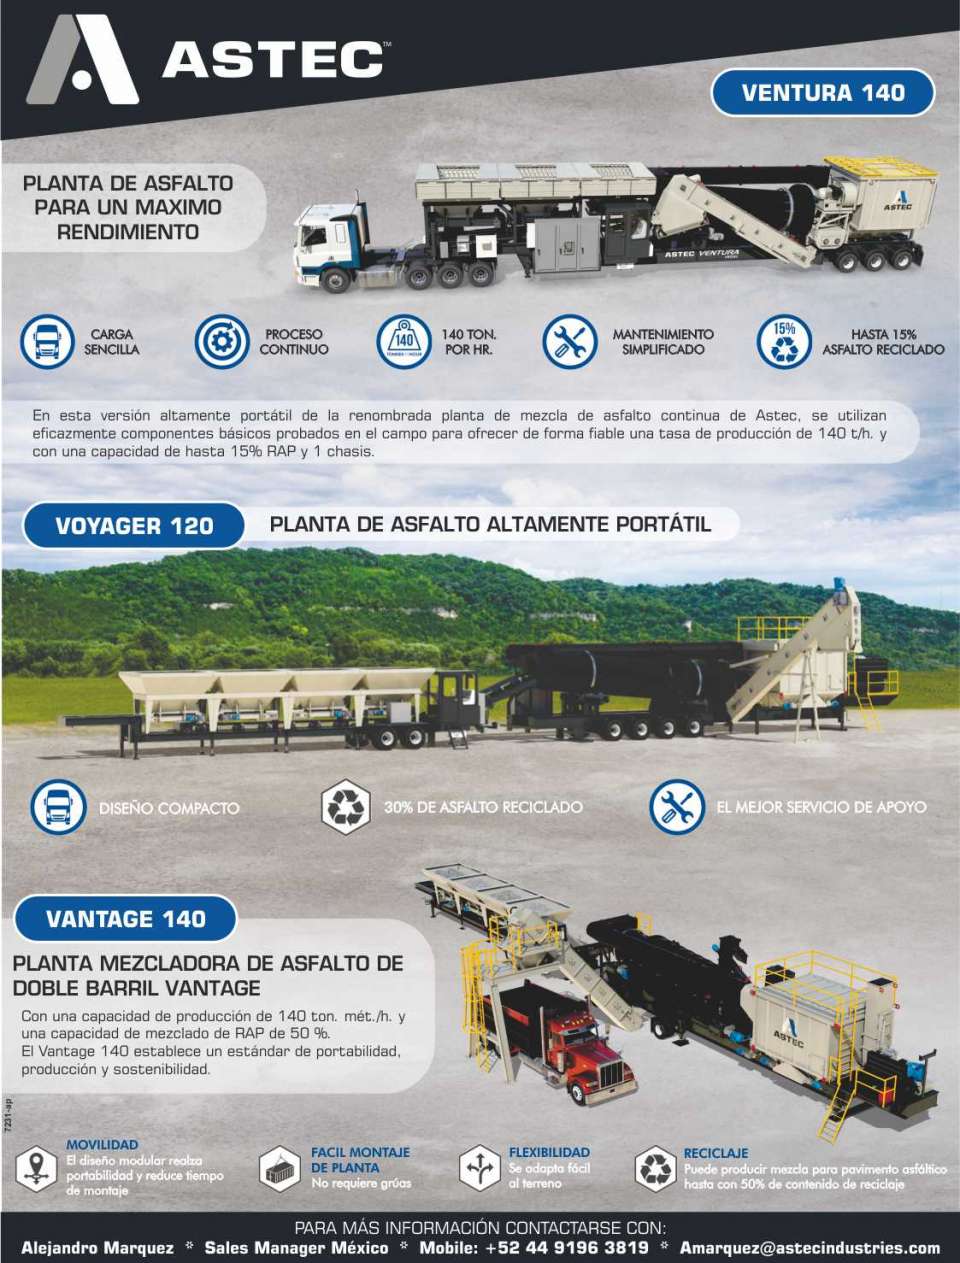 ASTEC manufactures asphalt plants for maximum performance and highly portable